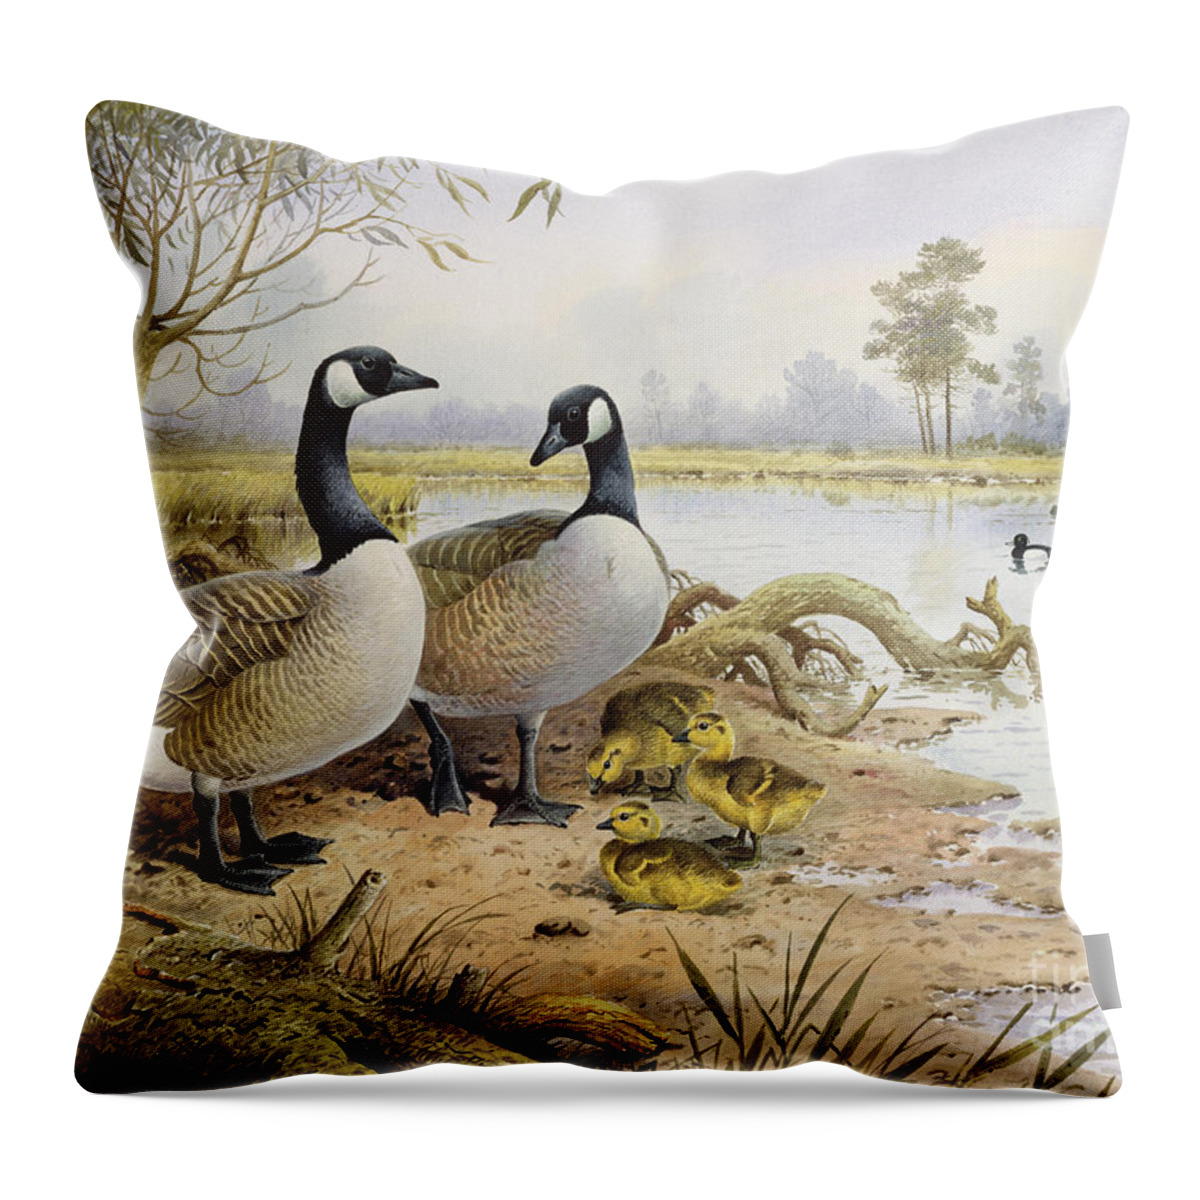 Canada Geese Throw Pillow featuring the painting Canada Geese by Carl Donner